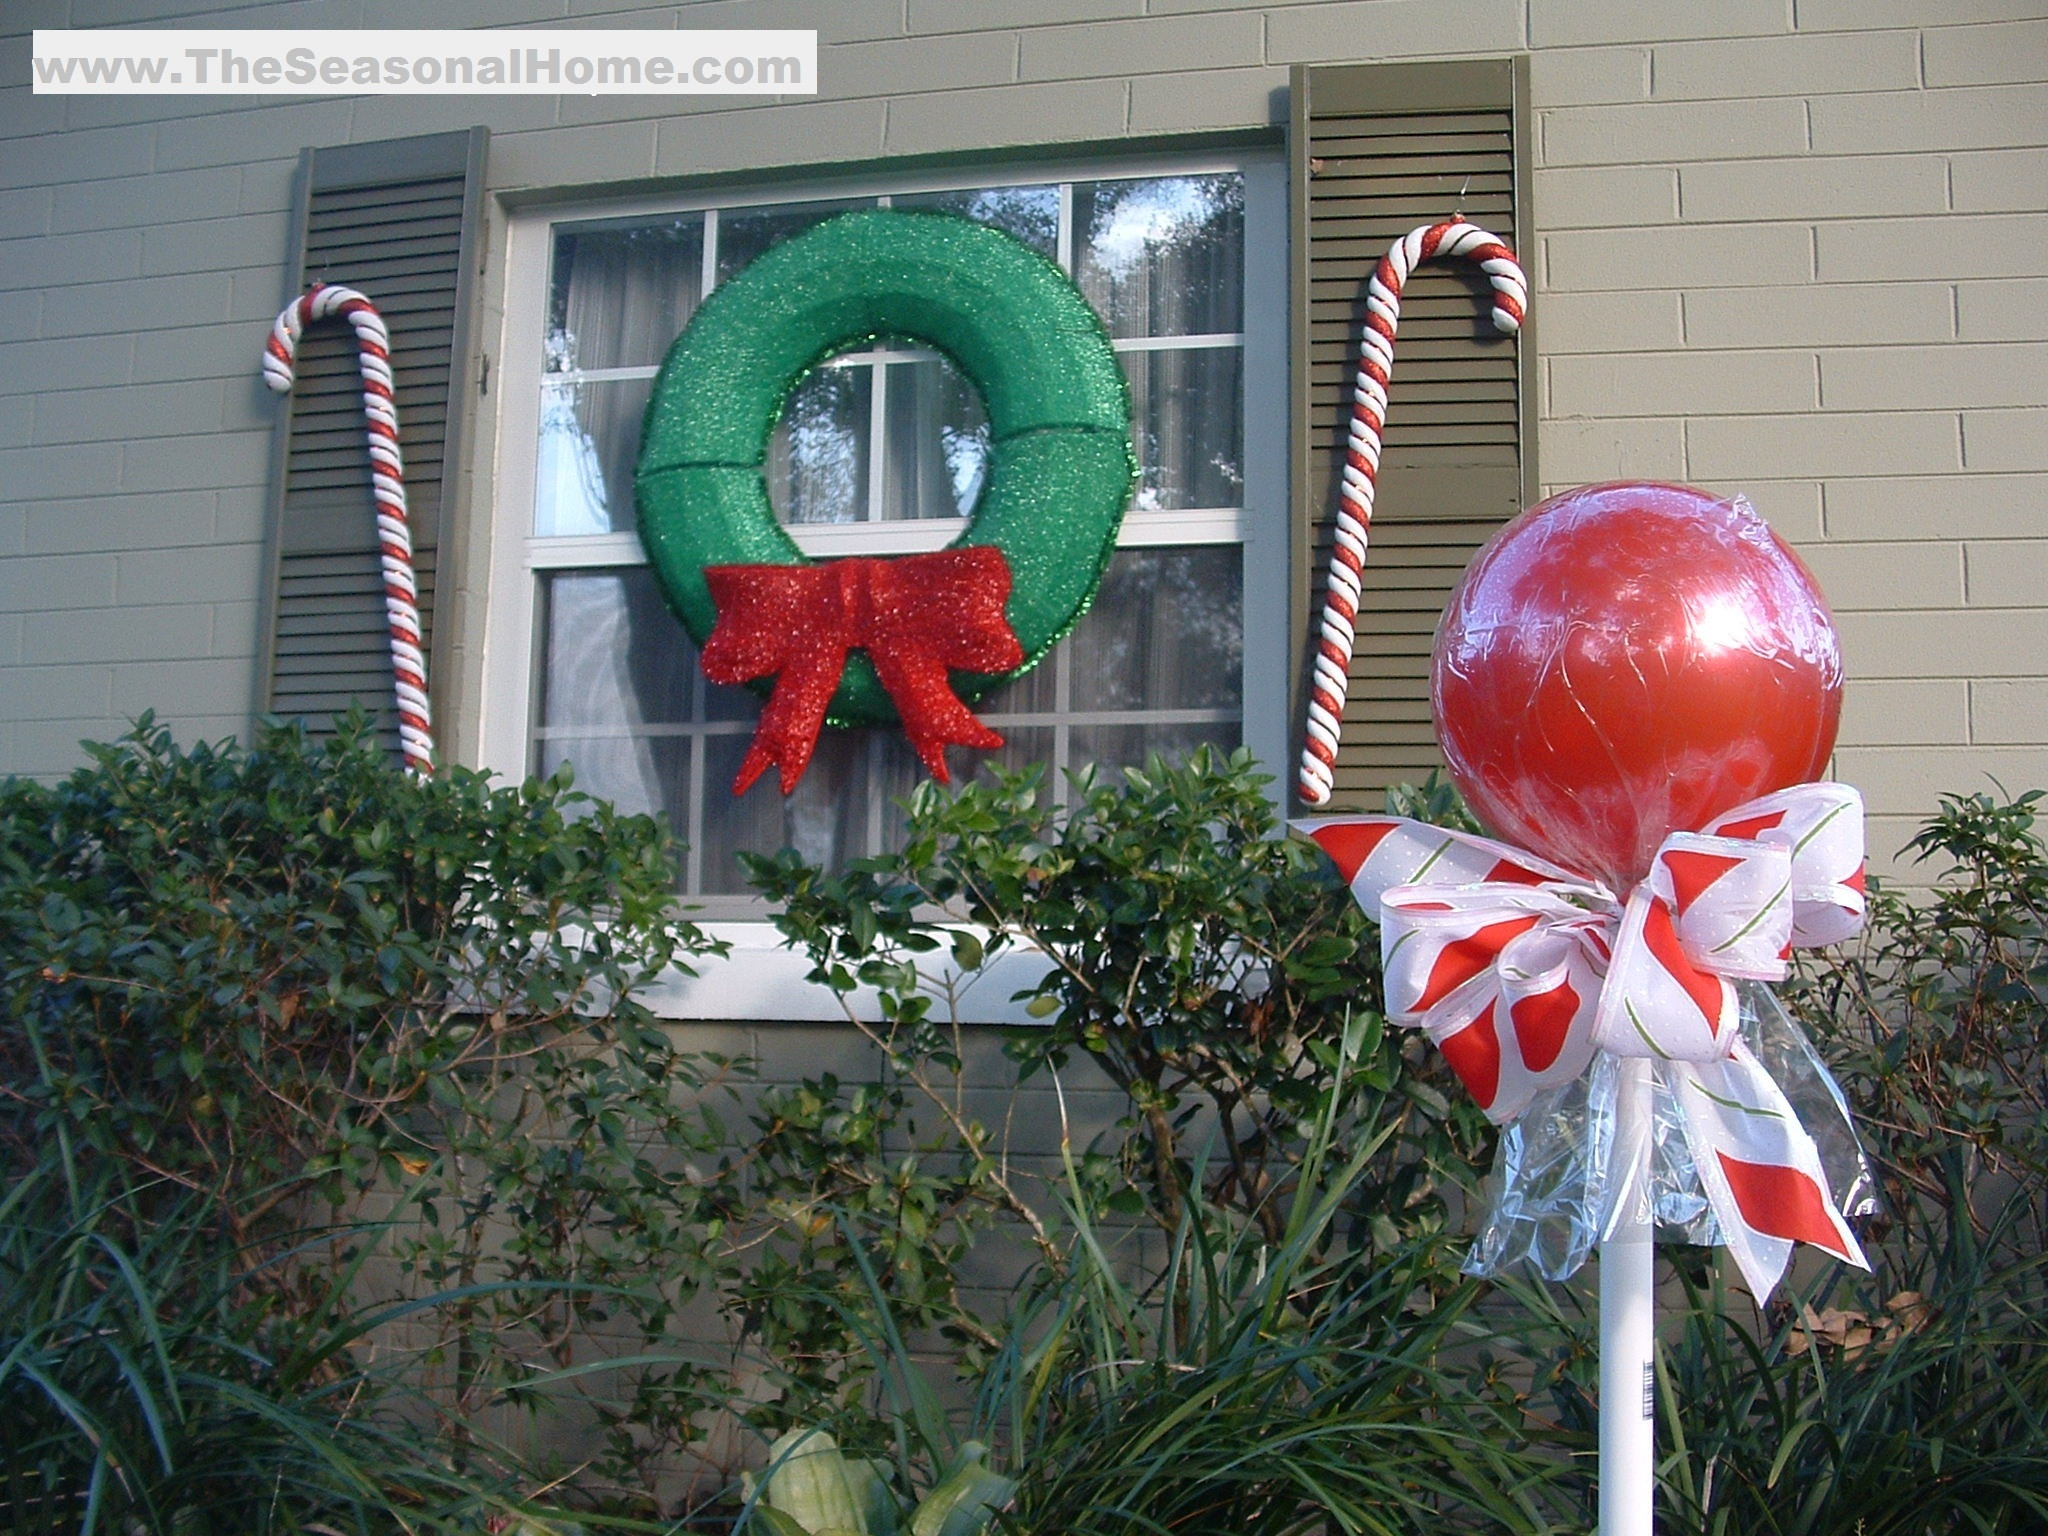 DIY Christmas Yard Decorations
 Outdoor “CANDY” A Christmas Decorating Idea The